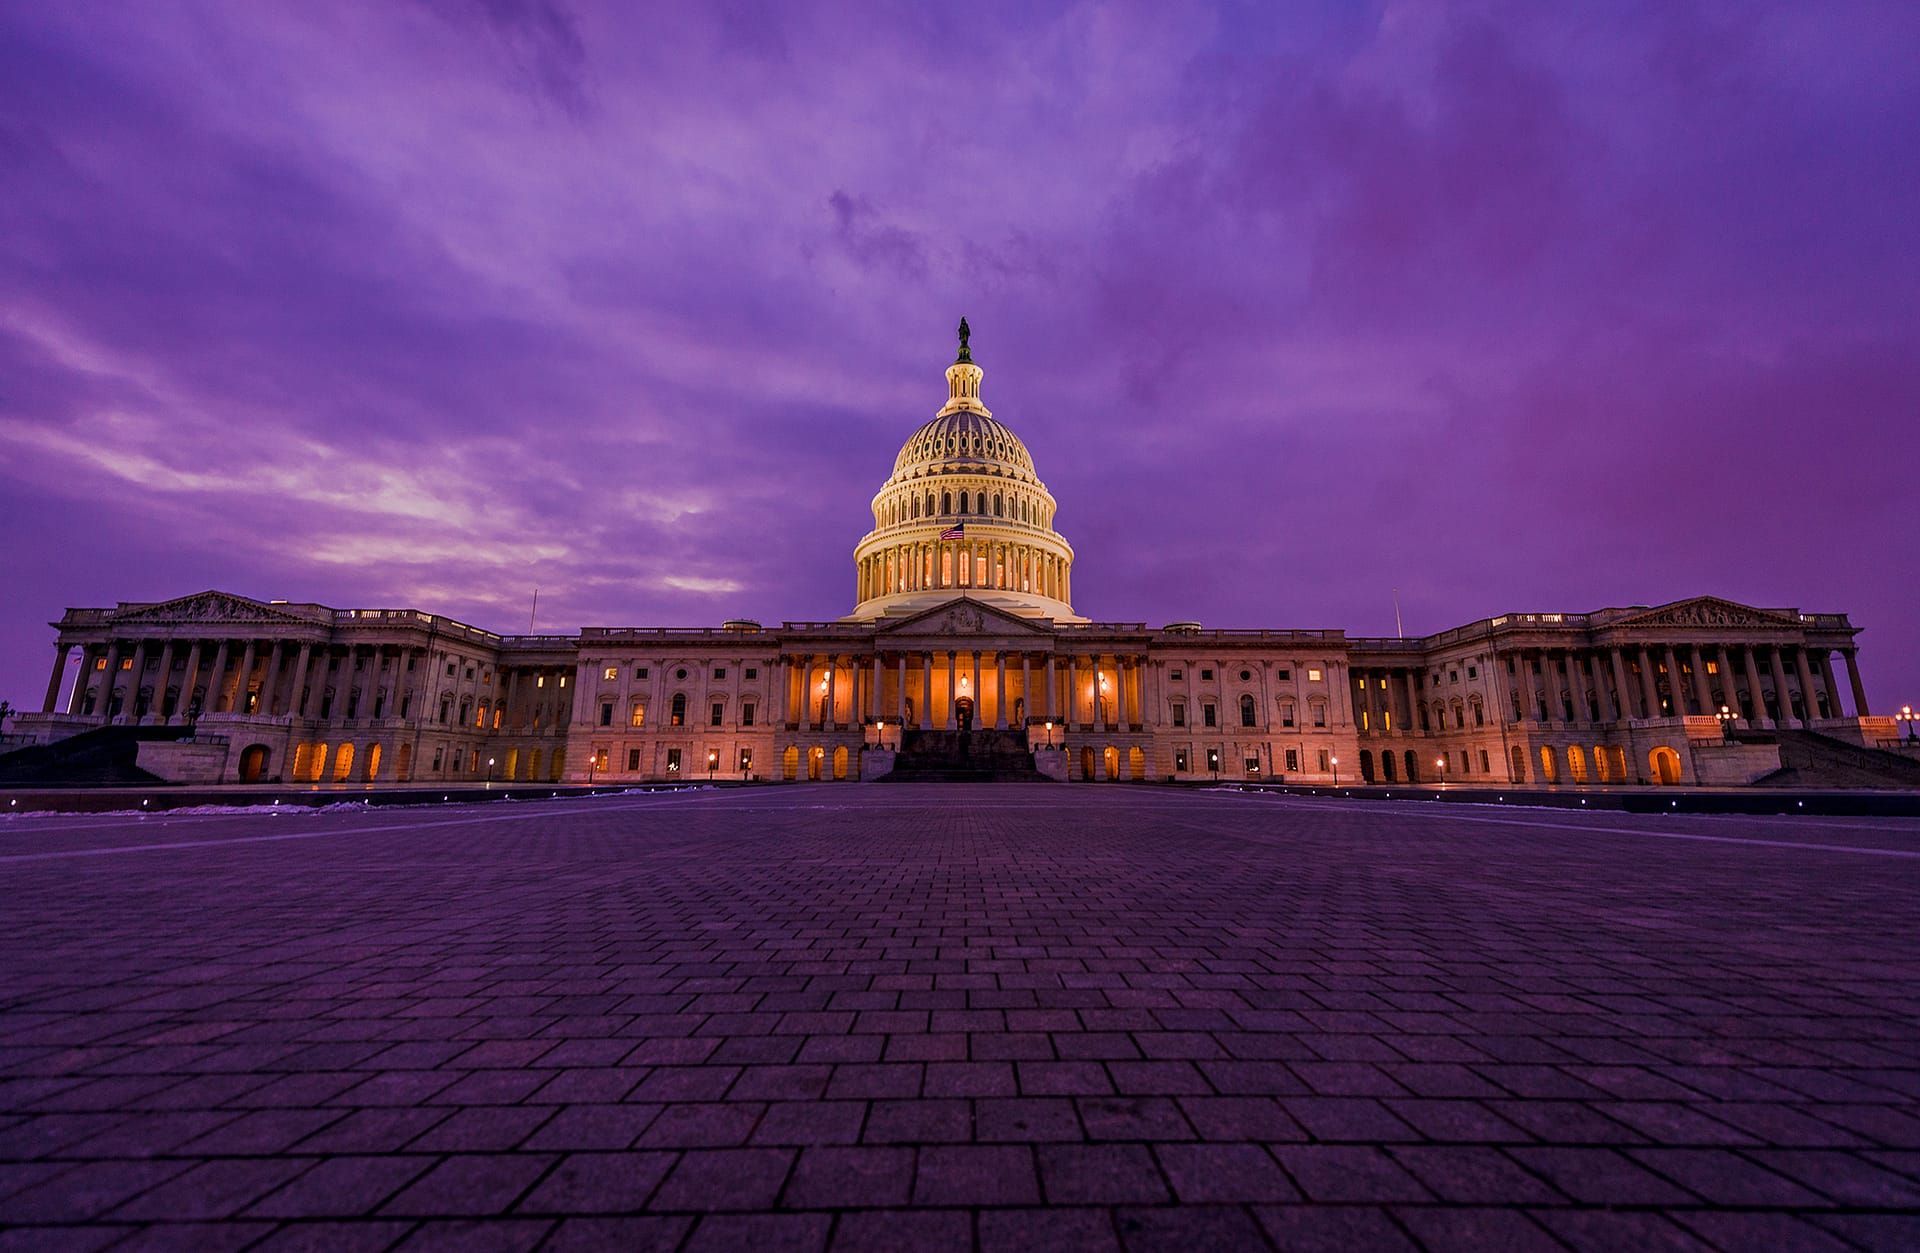 The capitol building is lit up at night with a purple sky in the background.